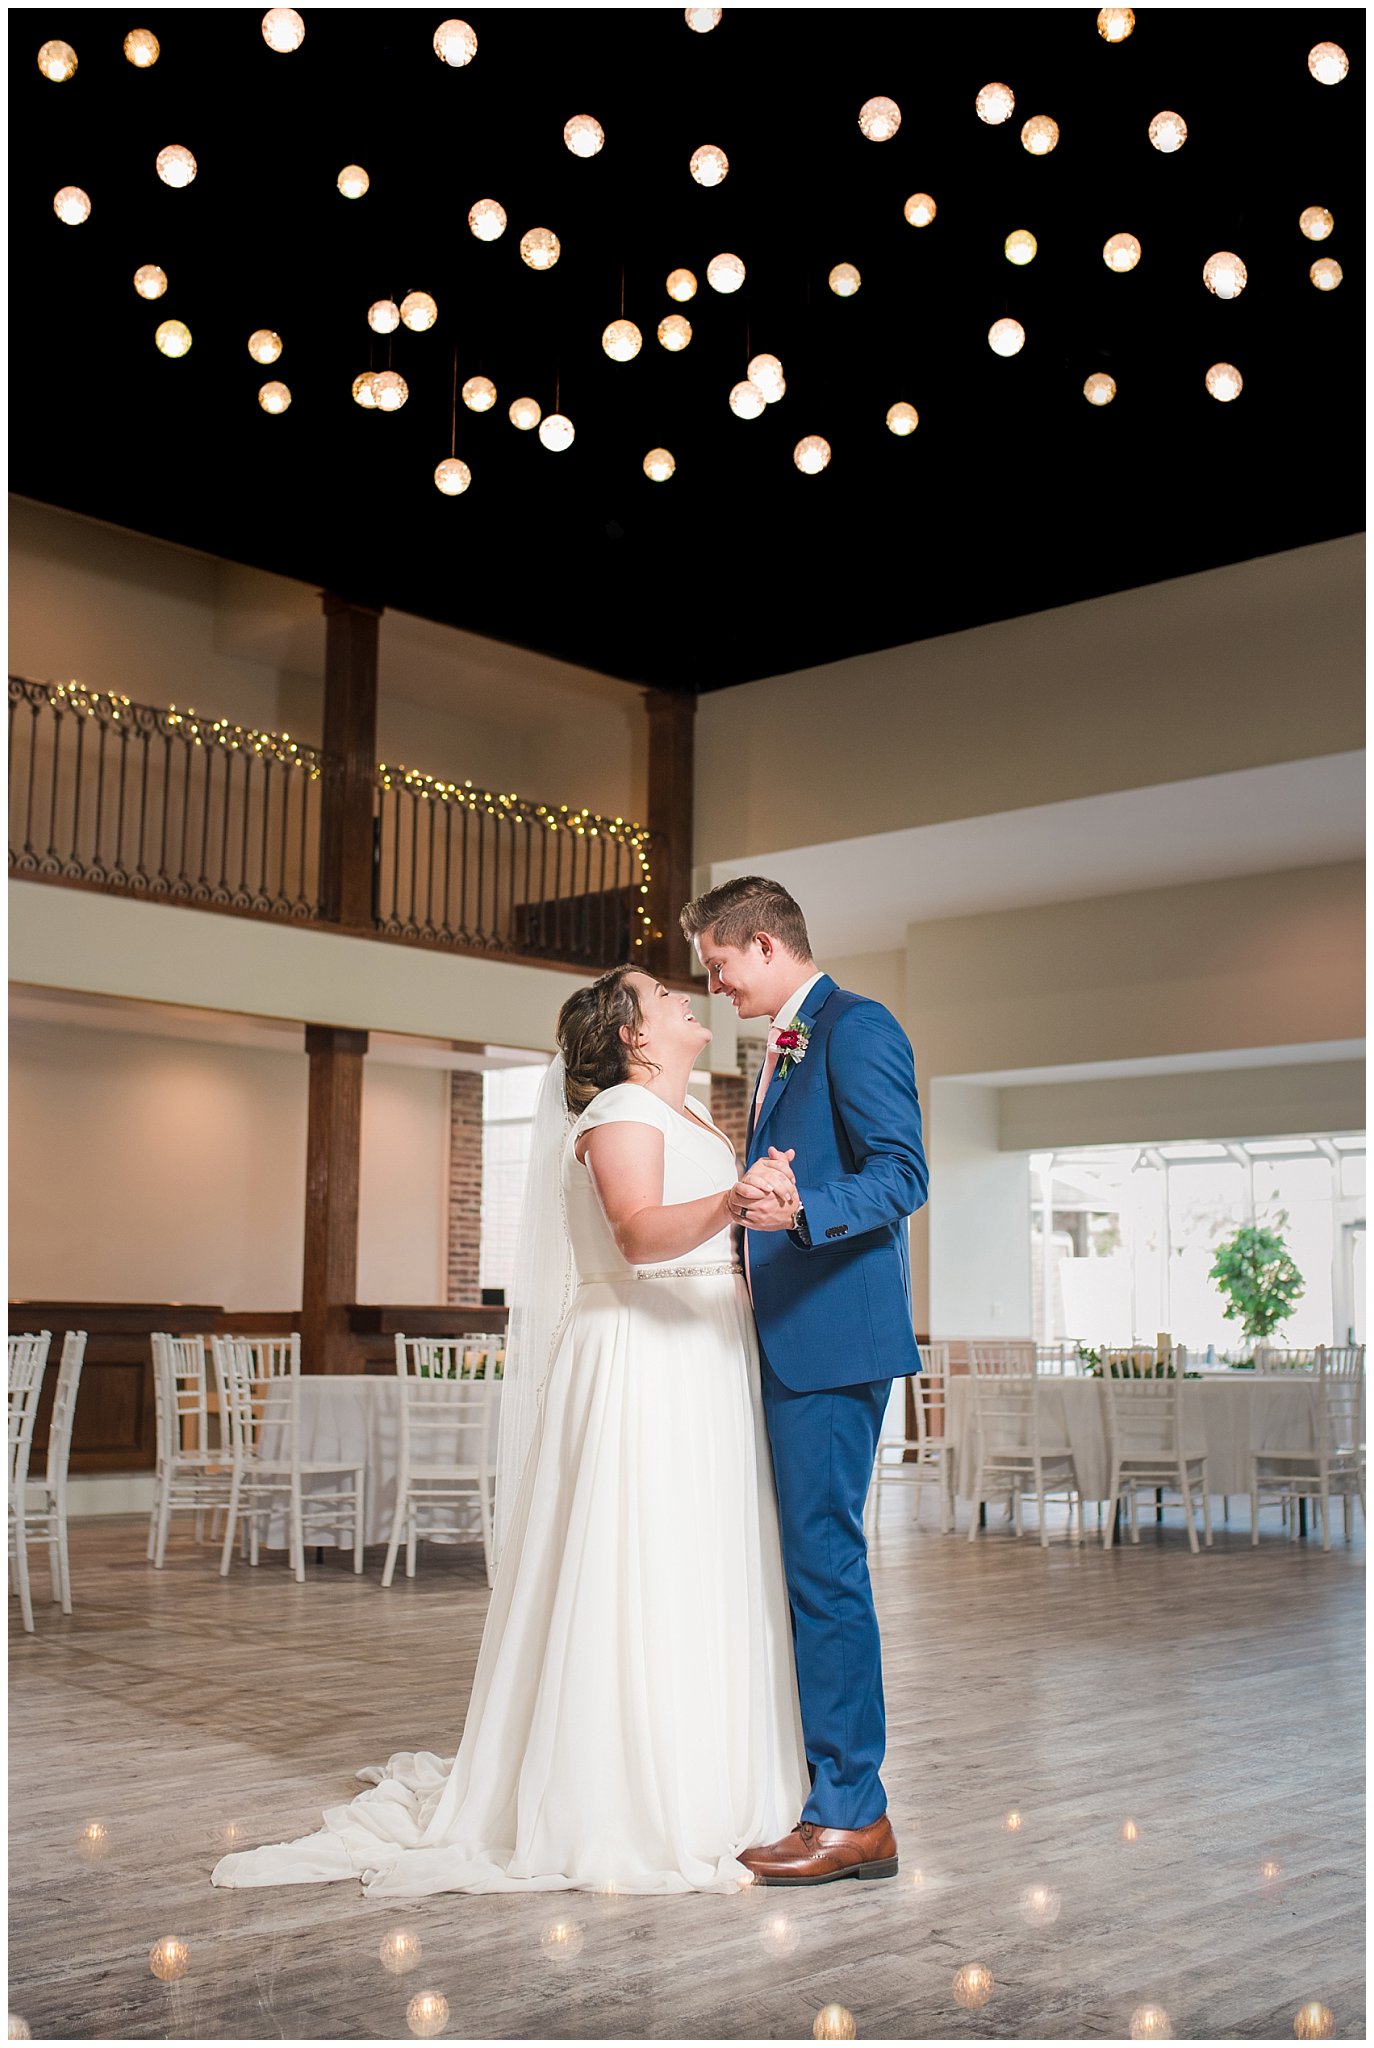 Bride and groom dance until large chandelier in flowy dress and cornish blue suit | Talia Event Center Summer Wedding | Jessie and Dallin Photography